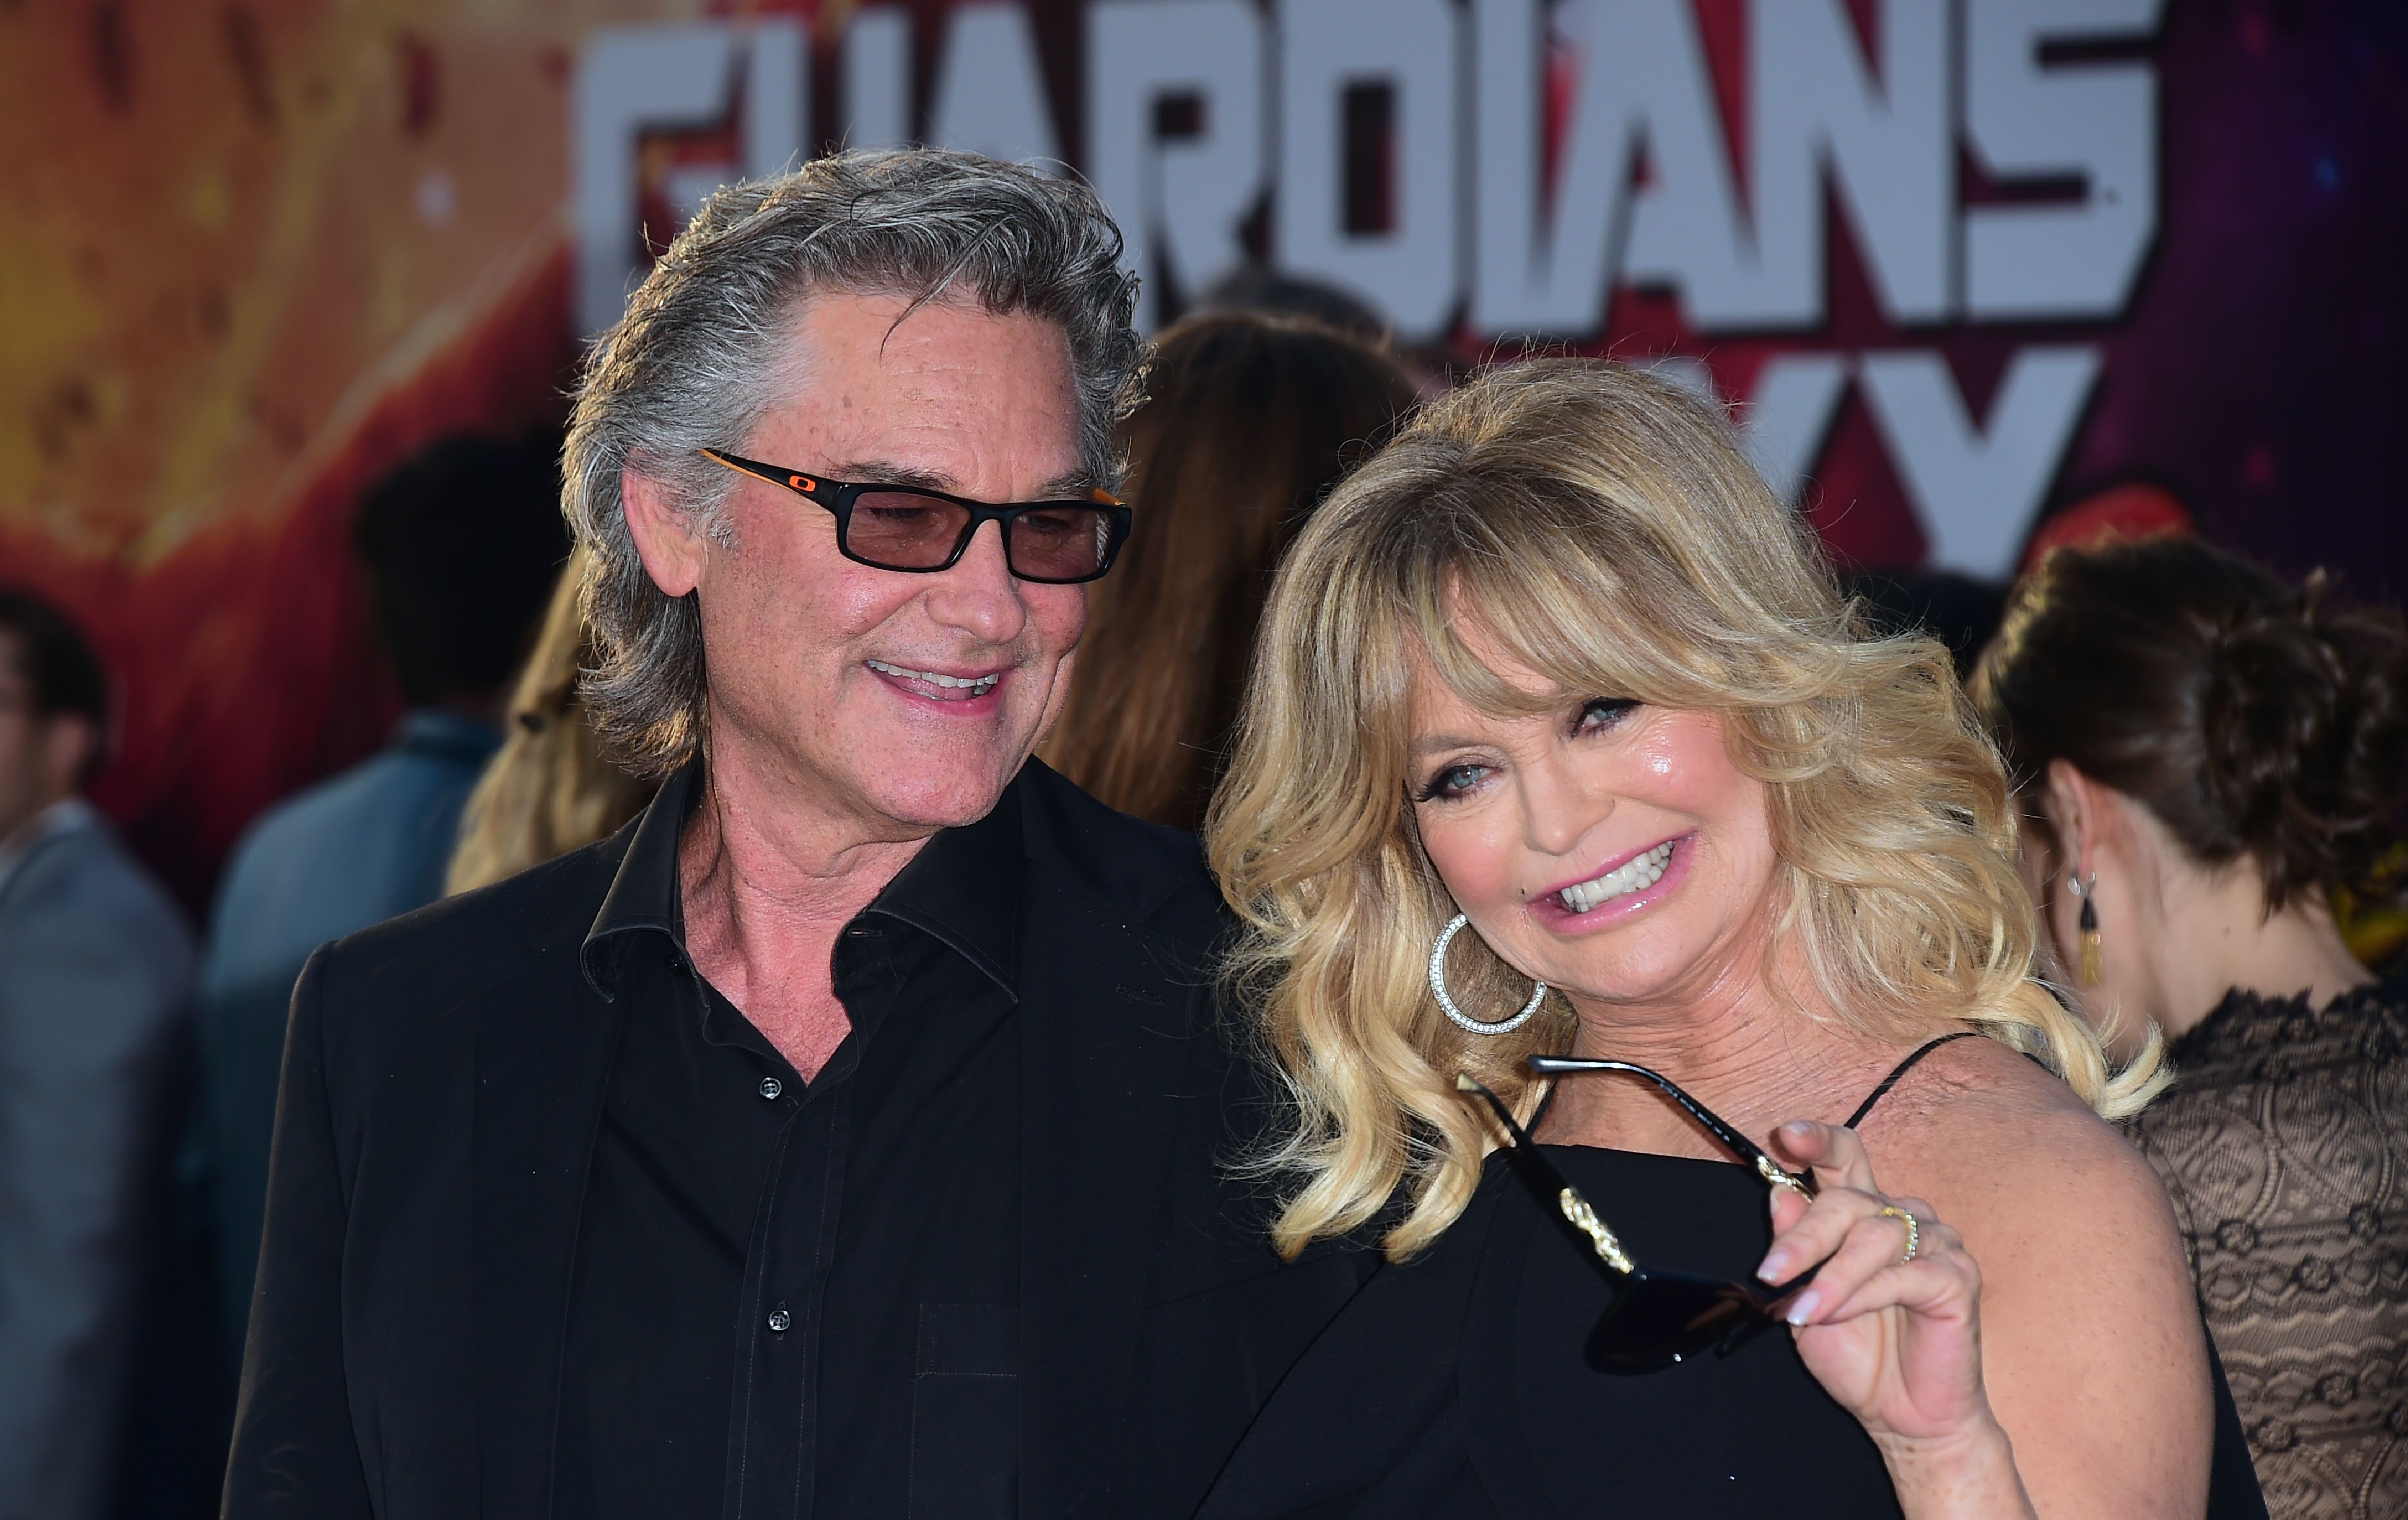 Kurt Russell and Goldie Hawn in Hollywood, California on April 19, 2017. | Source: Getty Images